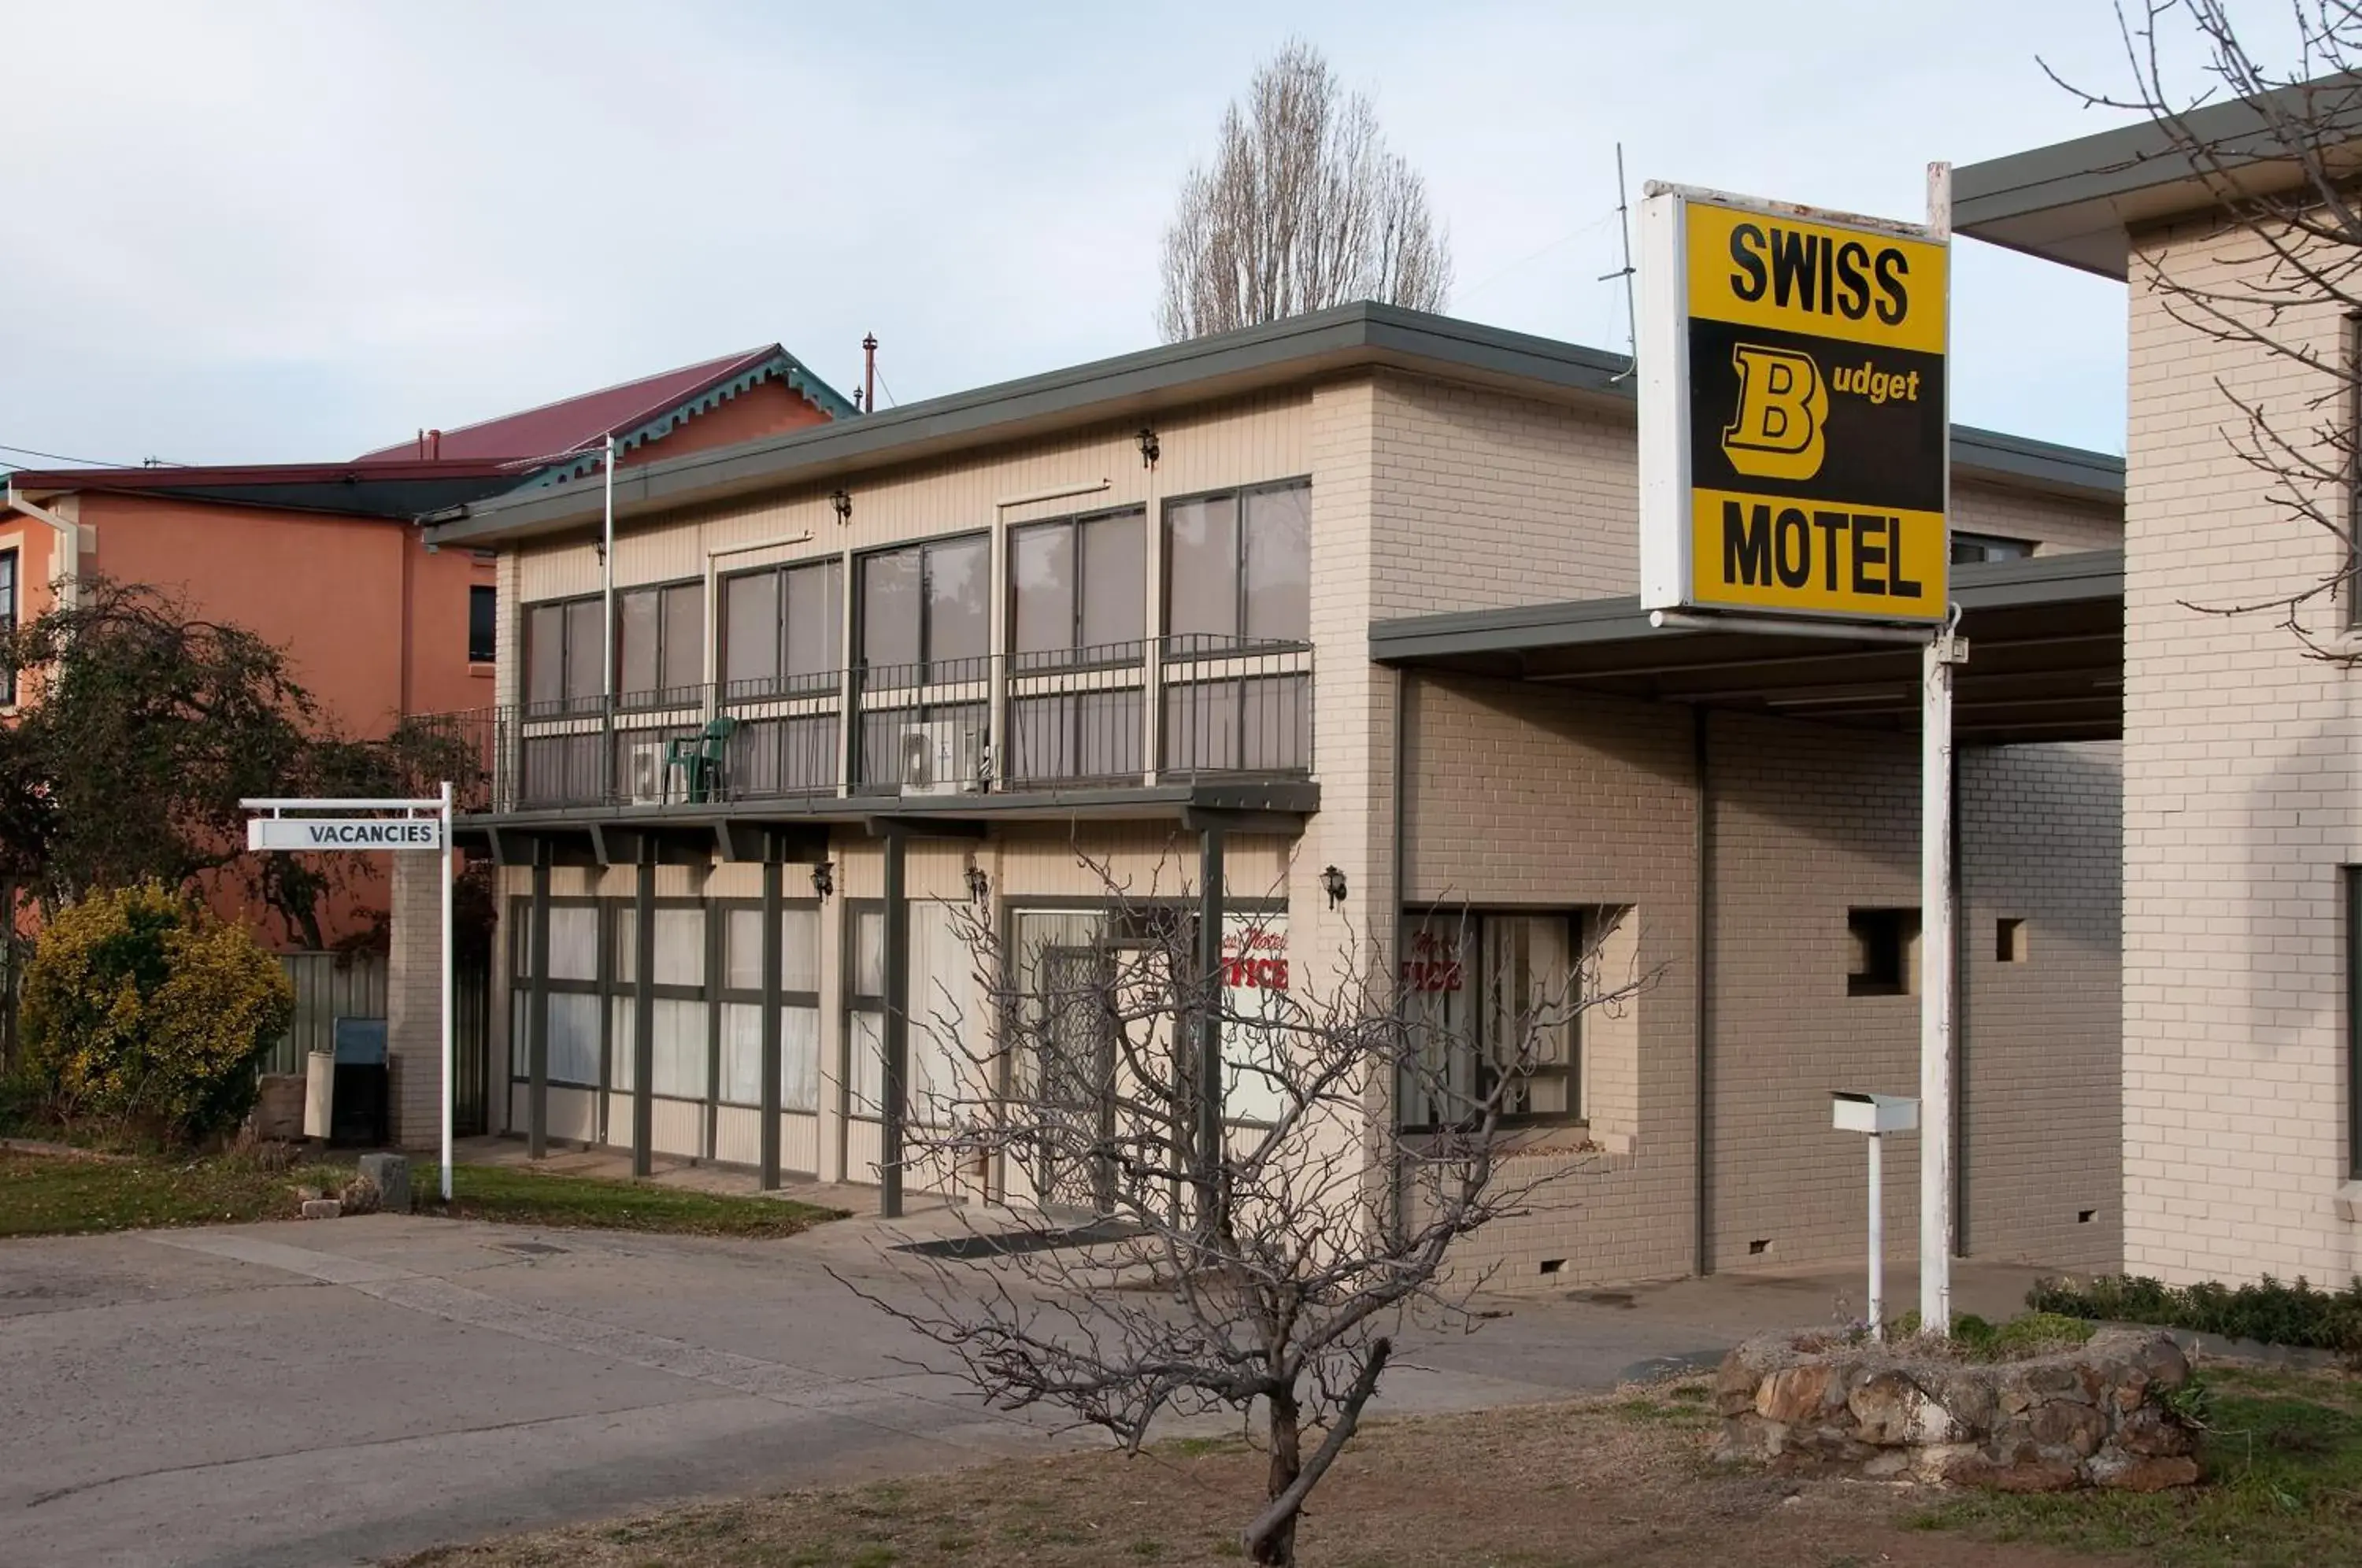 Street view, Facade/Entrance in The Swiss Motel